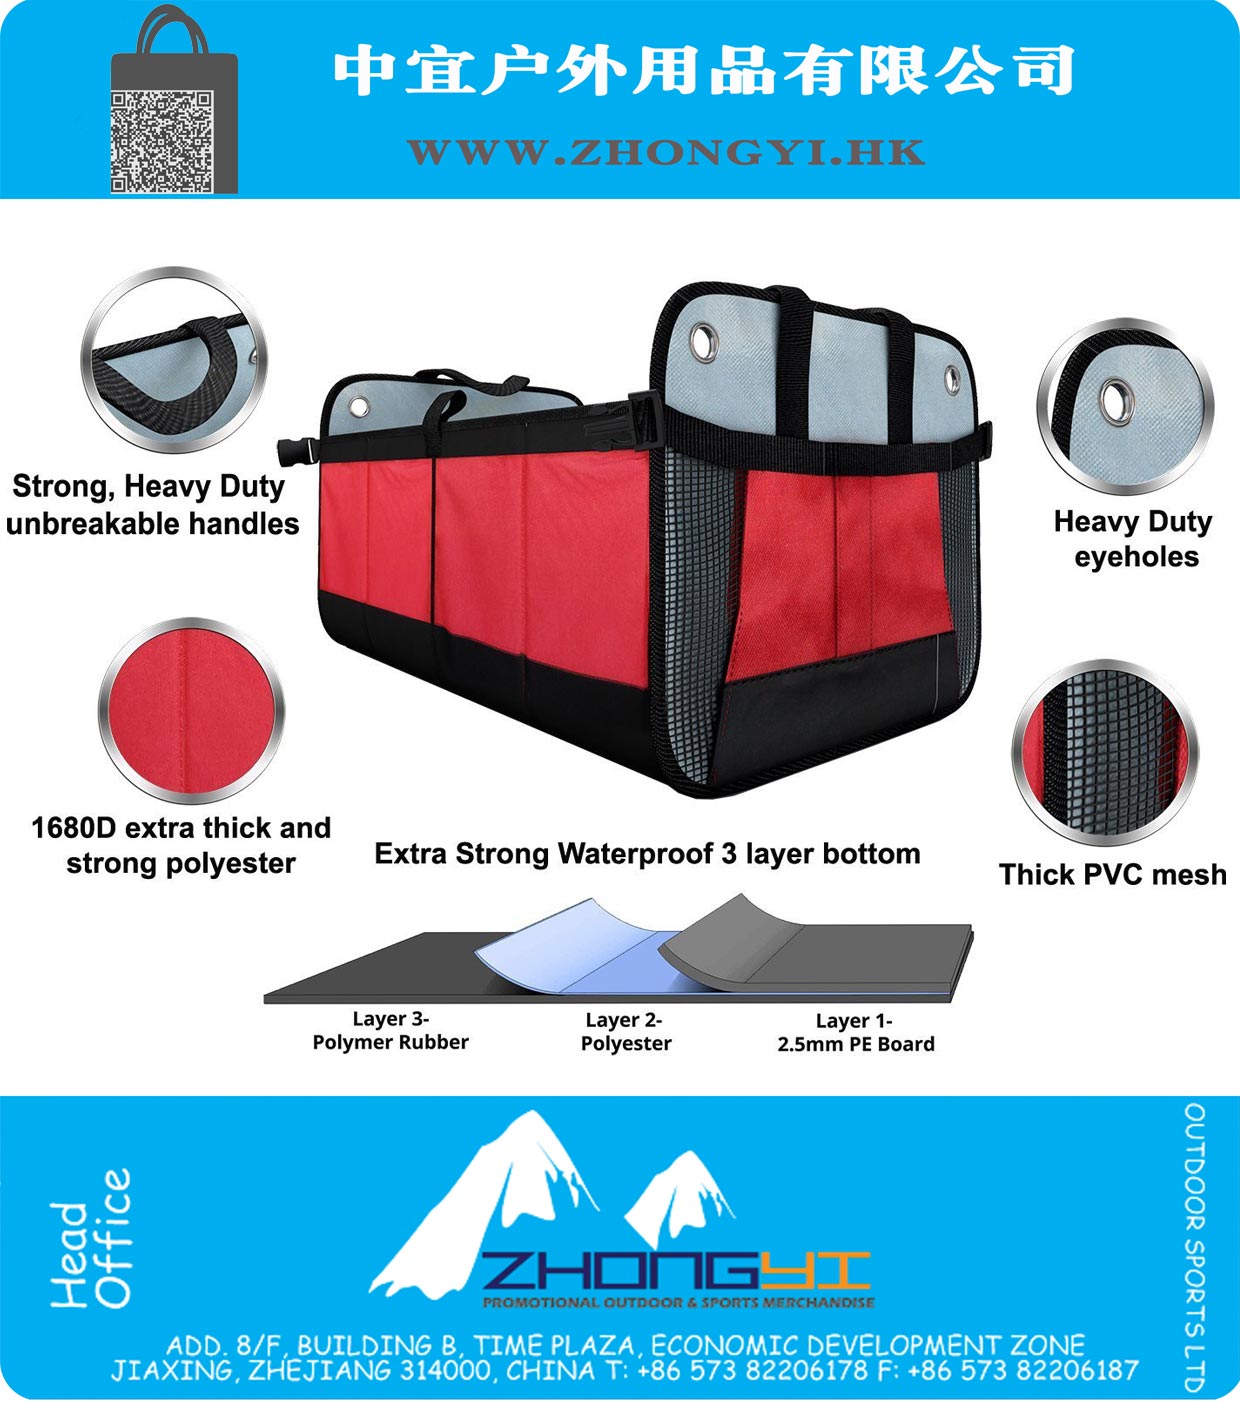 Collapsible and Foldable Auto Trunk Organizer with 3 Compartments, Side Pockets and Velcro Divider